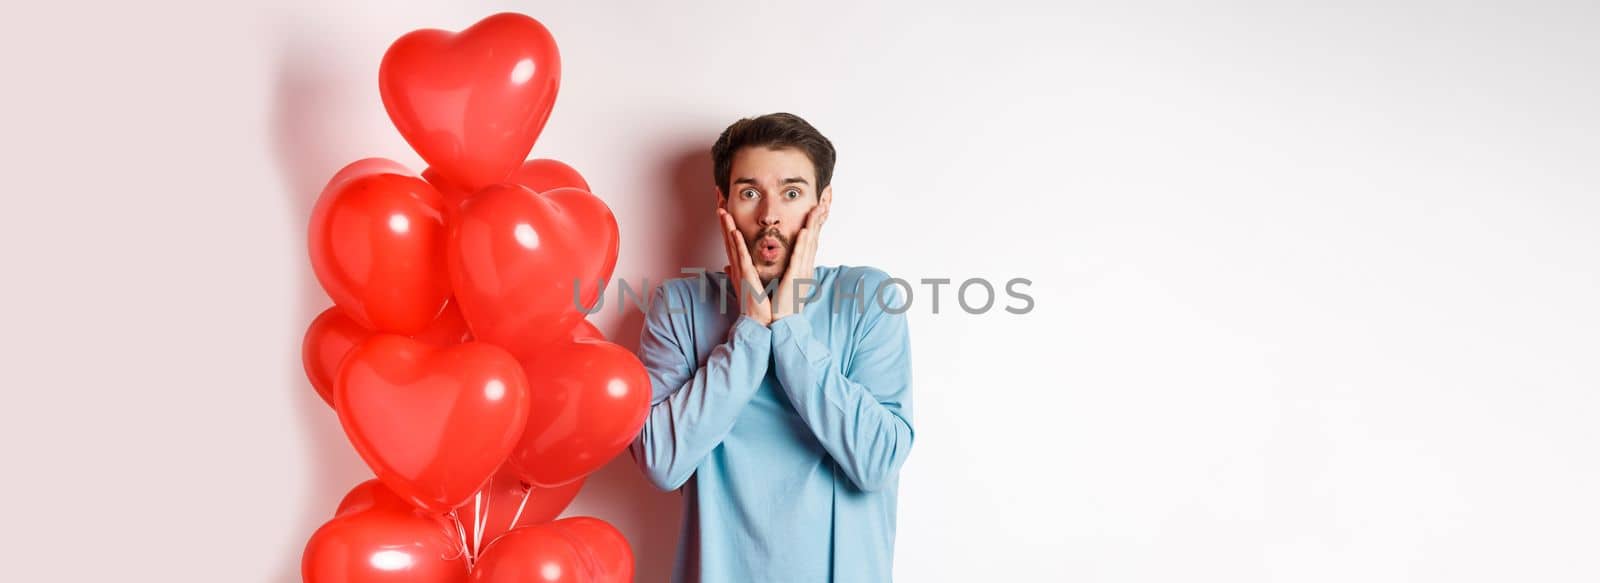 Valentines day. Image of young man standing near hearts balloons with shocked face, staring startled at camera, white background.